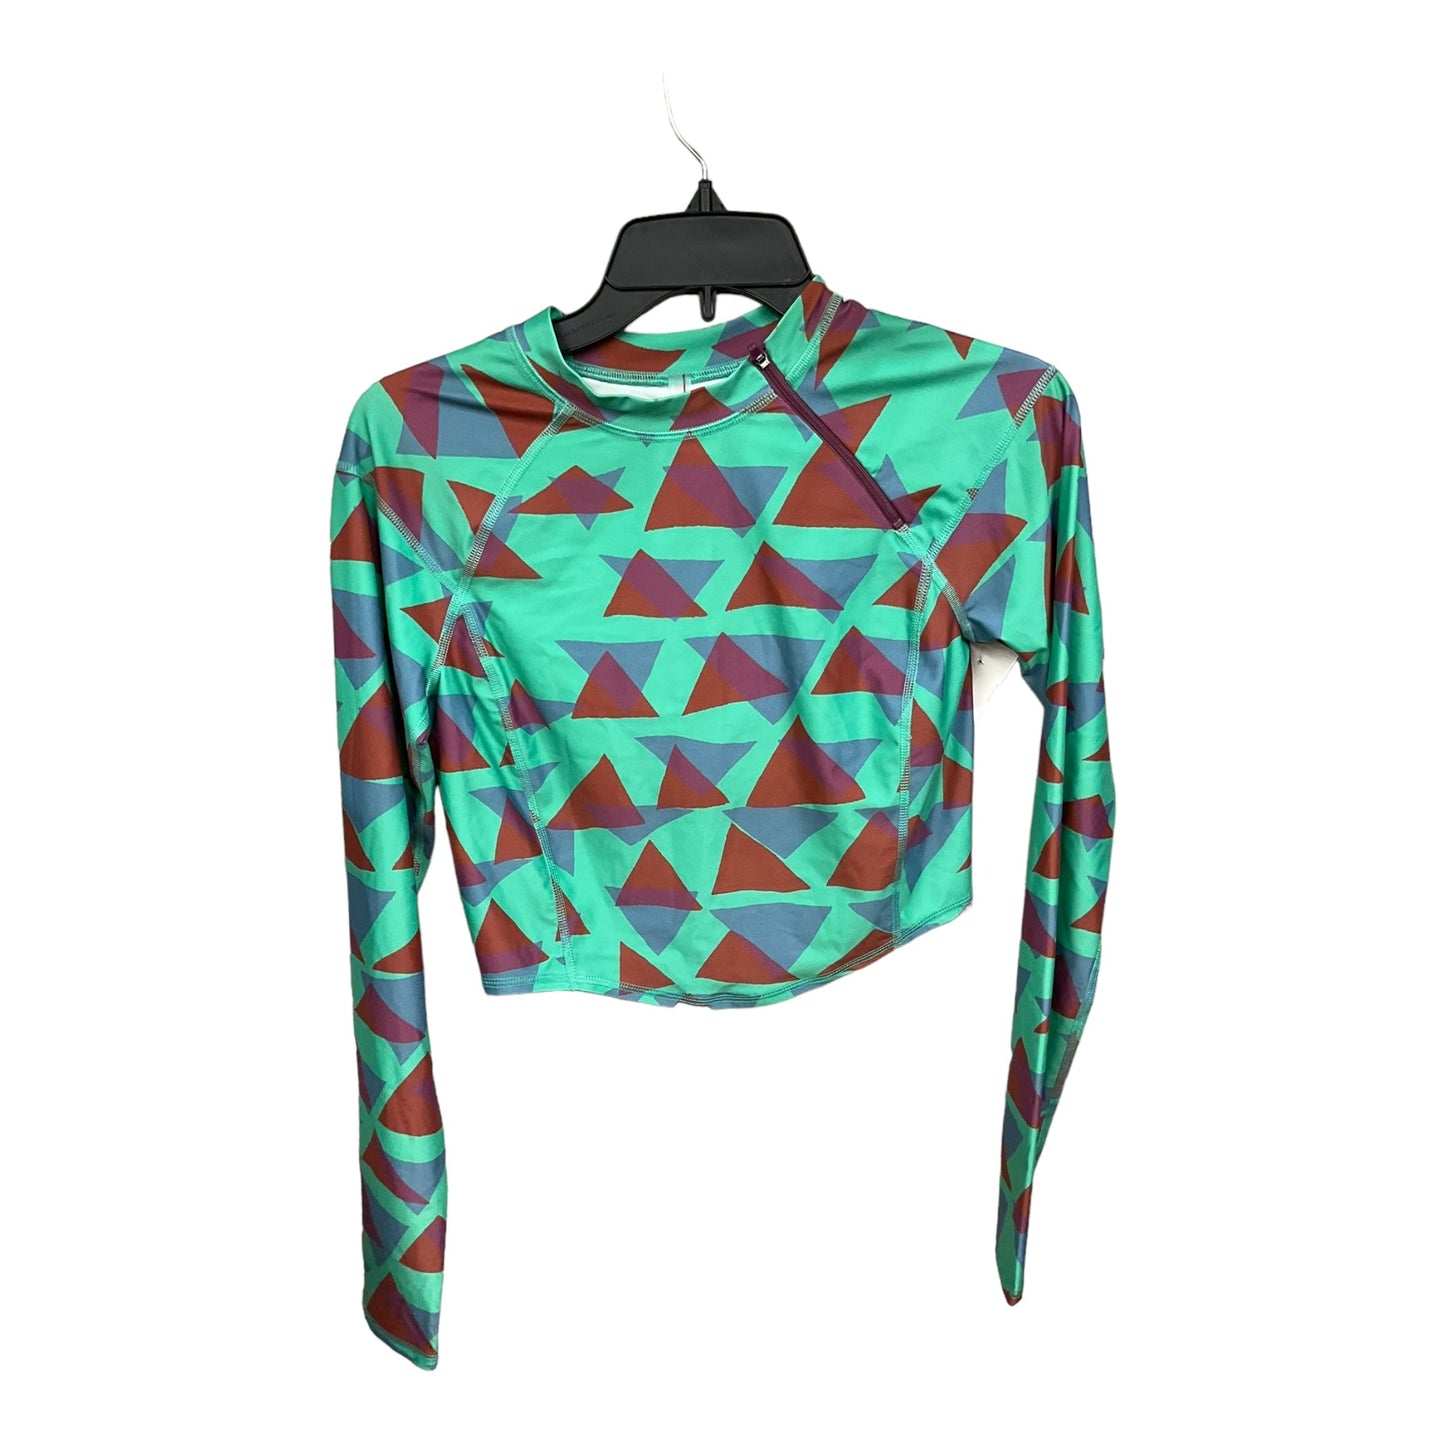 Geometric Pattern Athletic Top Long Sleeve Collar Free People, Size S